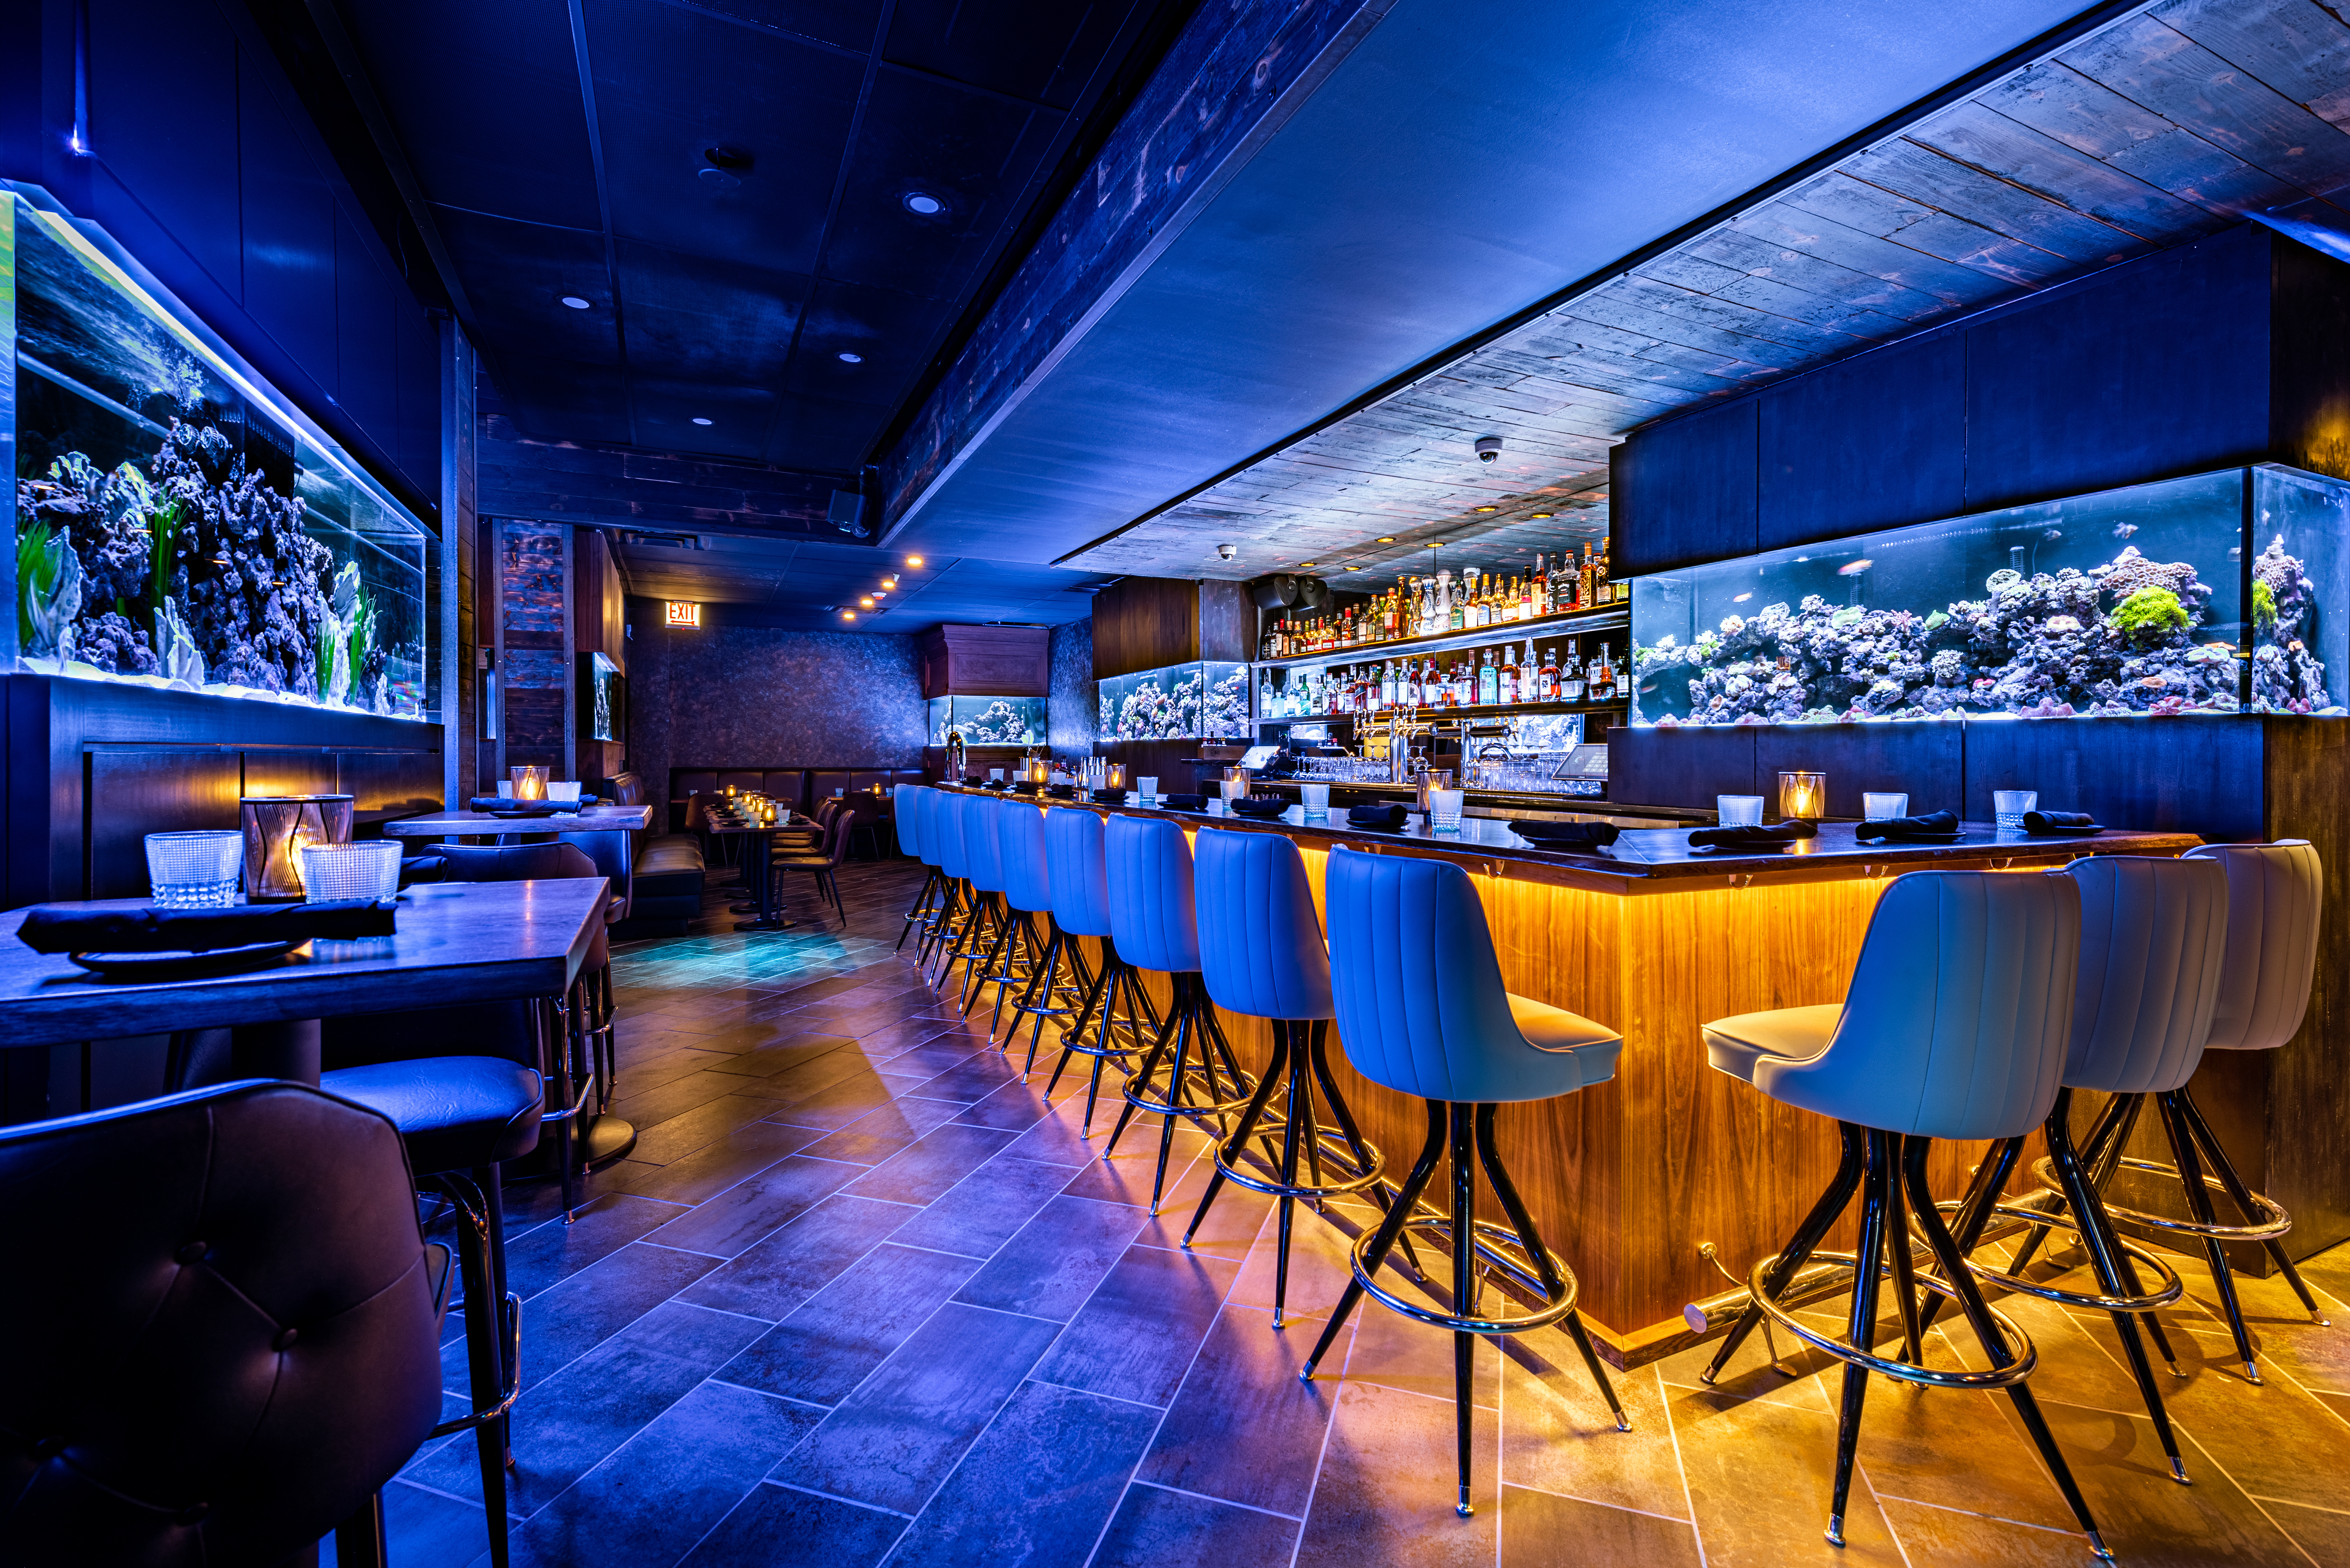 A bar space cast in blue light with large aquariums around the room.